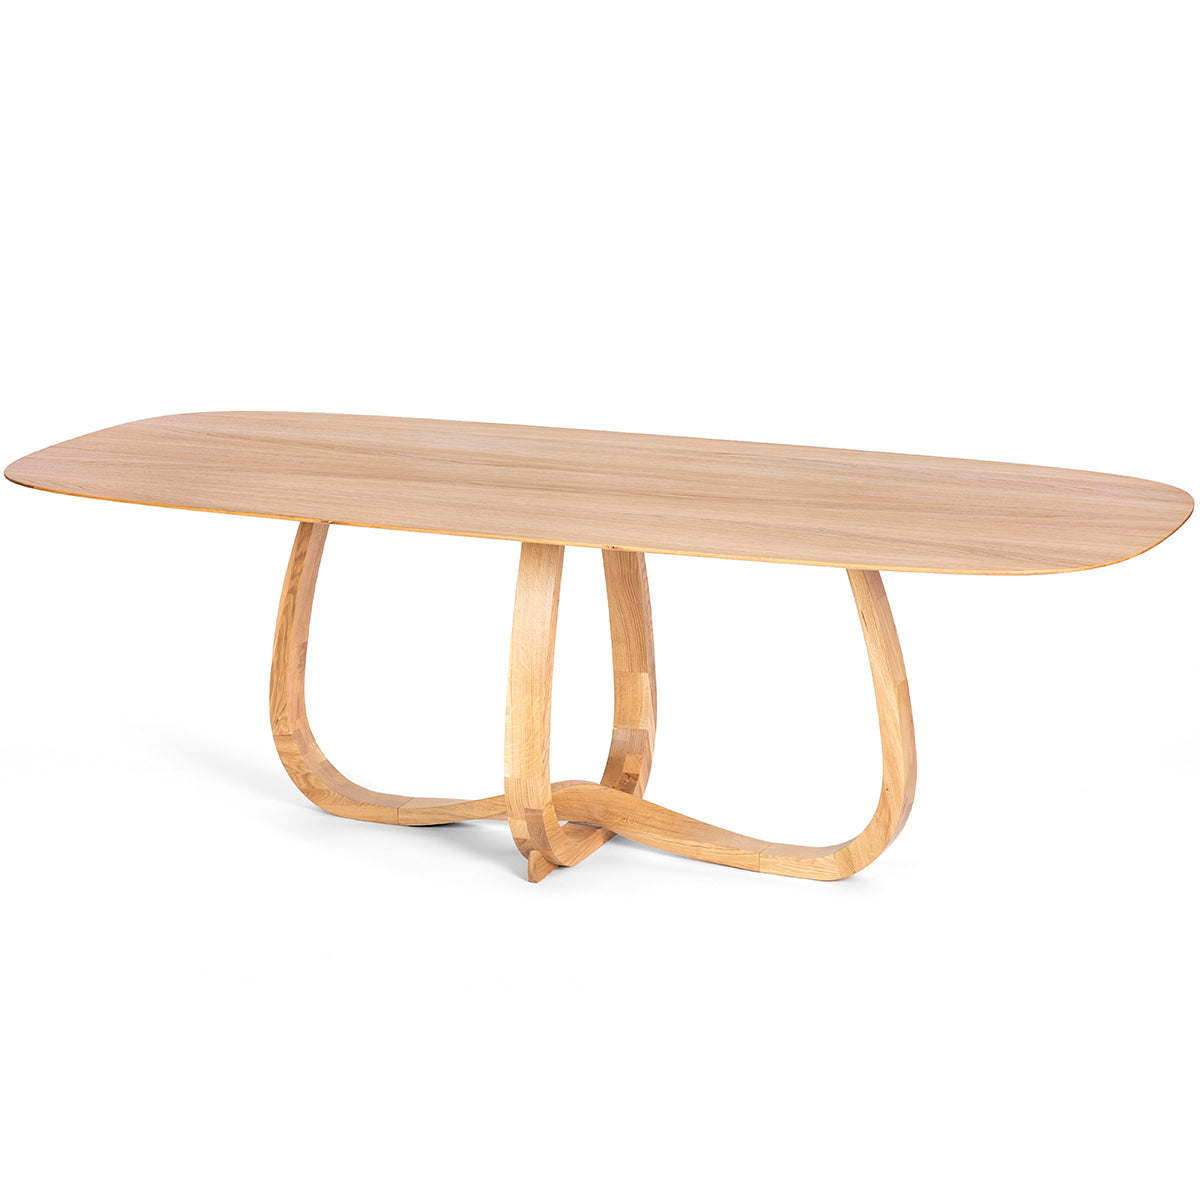 Lup Oak Dining Table